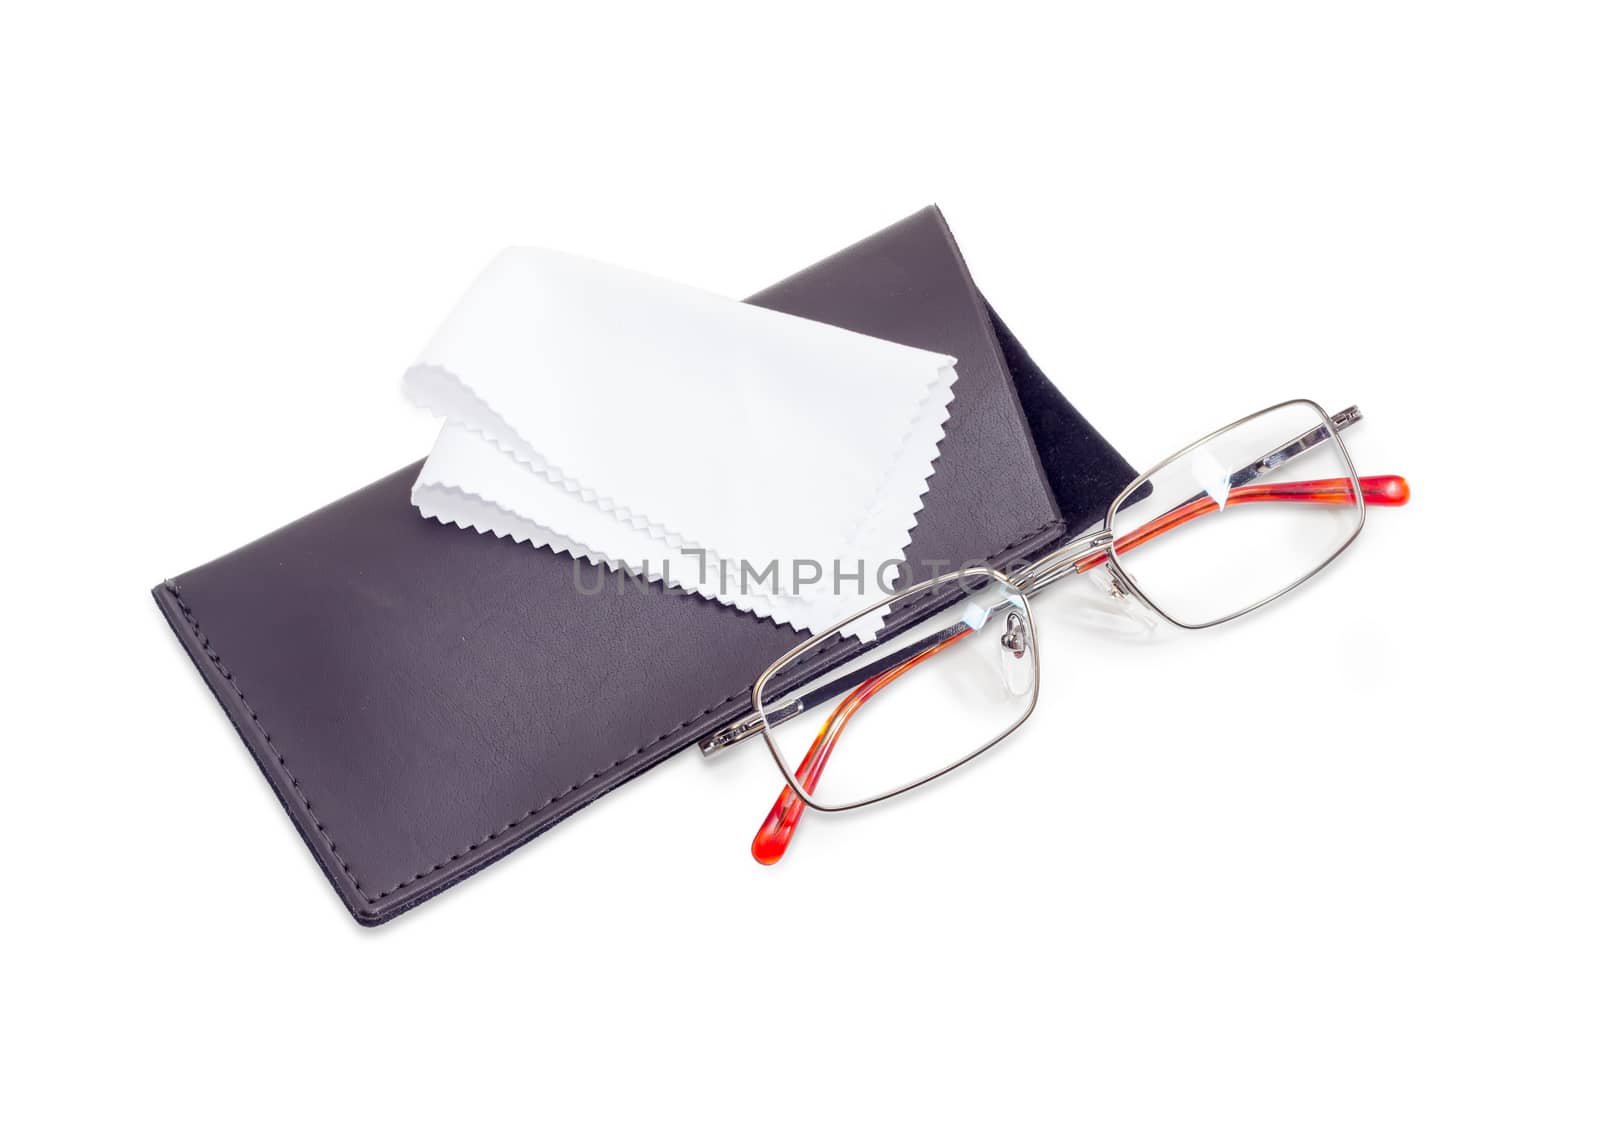 Modern classic men's eyeglasses and soft spectacle-case by anmbph